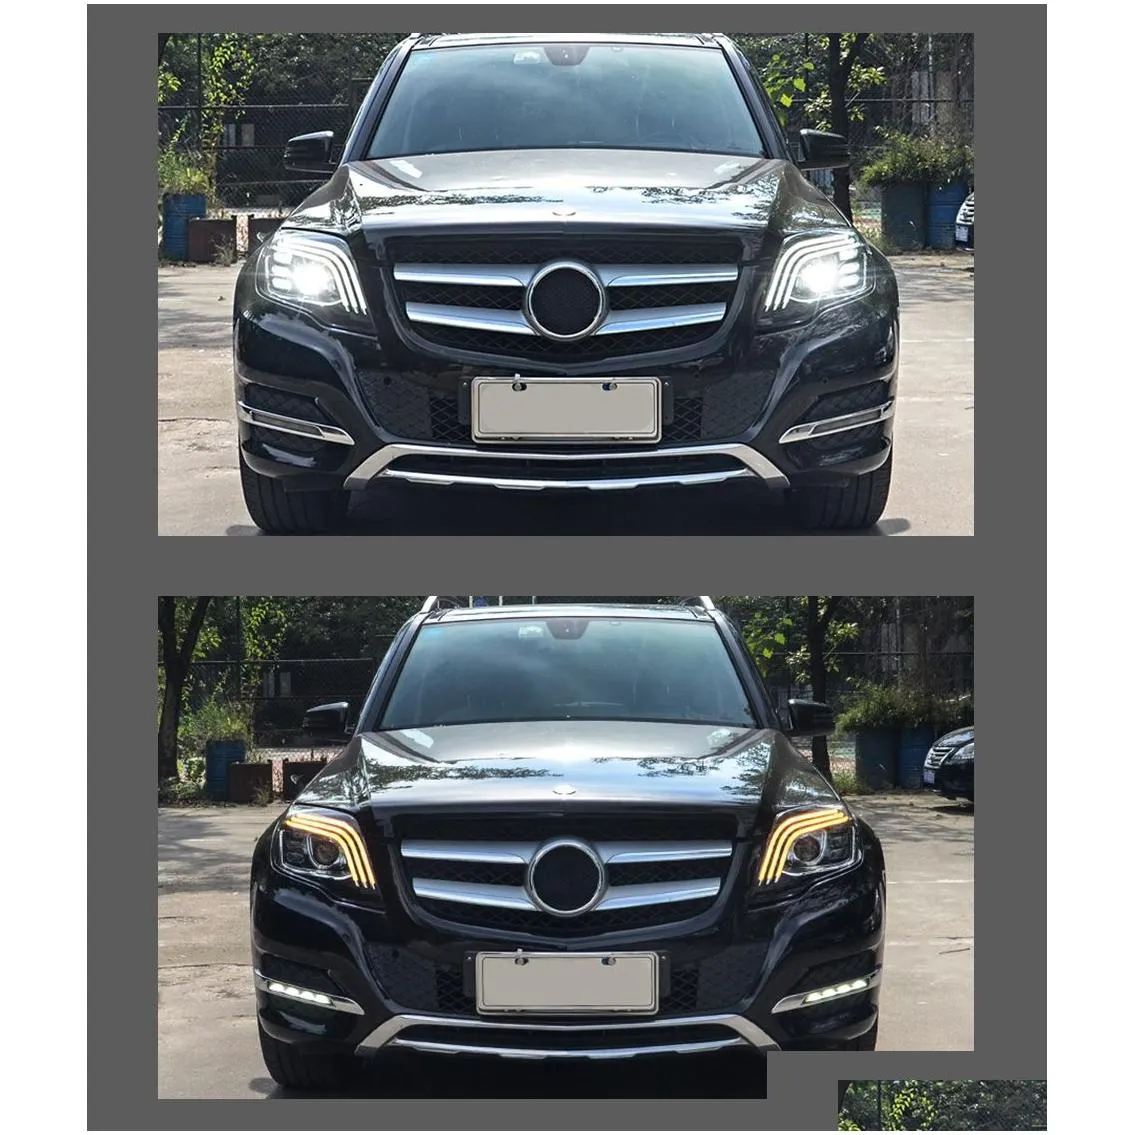 Auto Parts For GLK X204 Headlights 2008-20 15 Upgrade  Styling LED Daytime Lights Turn Signal Lamp